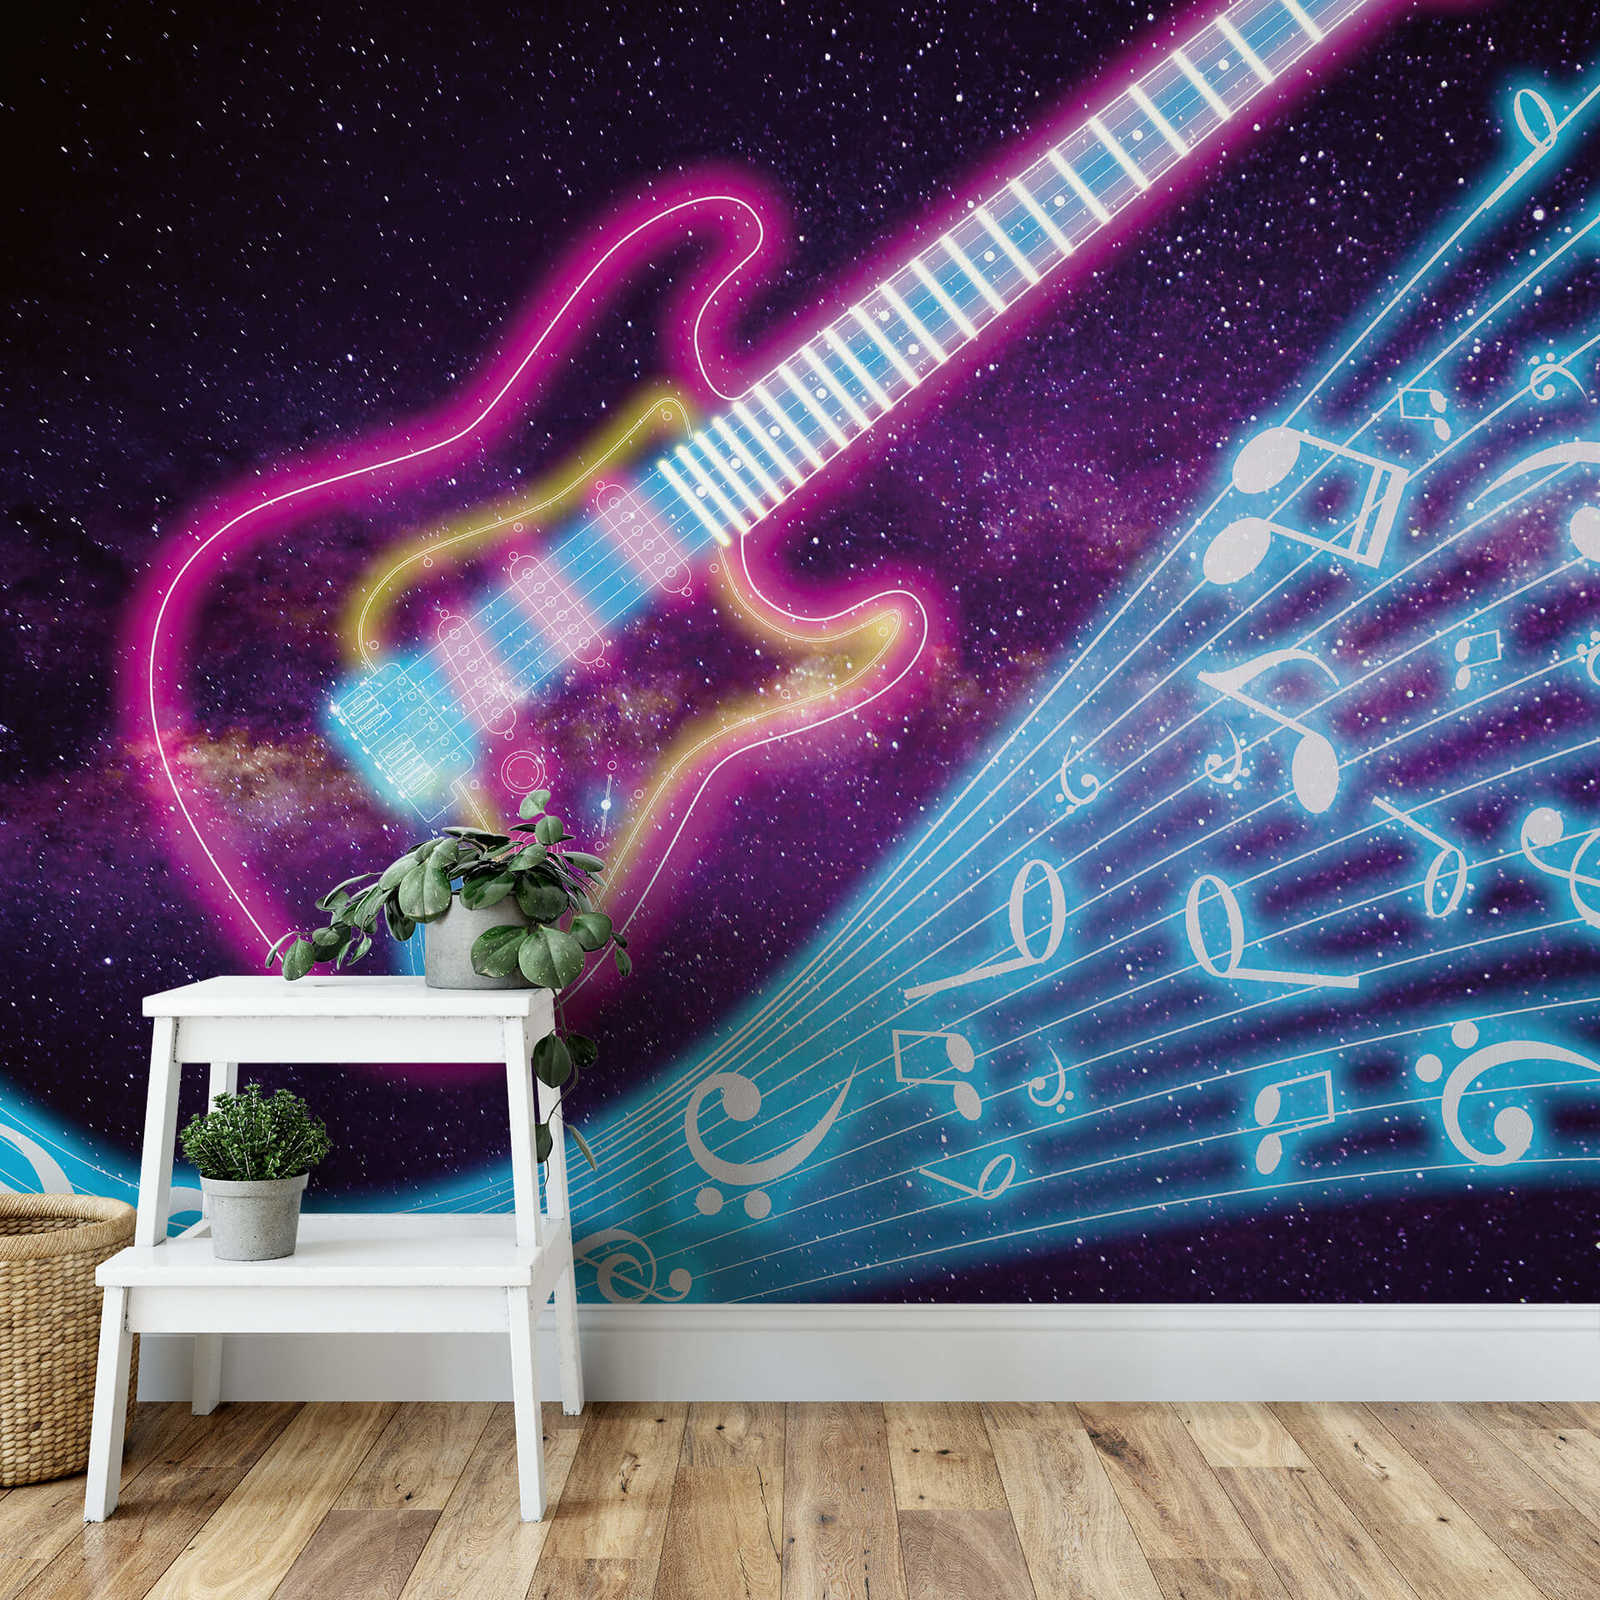             Photo wallpaper music with galaxy & neon design - purple, turquoise
        